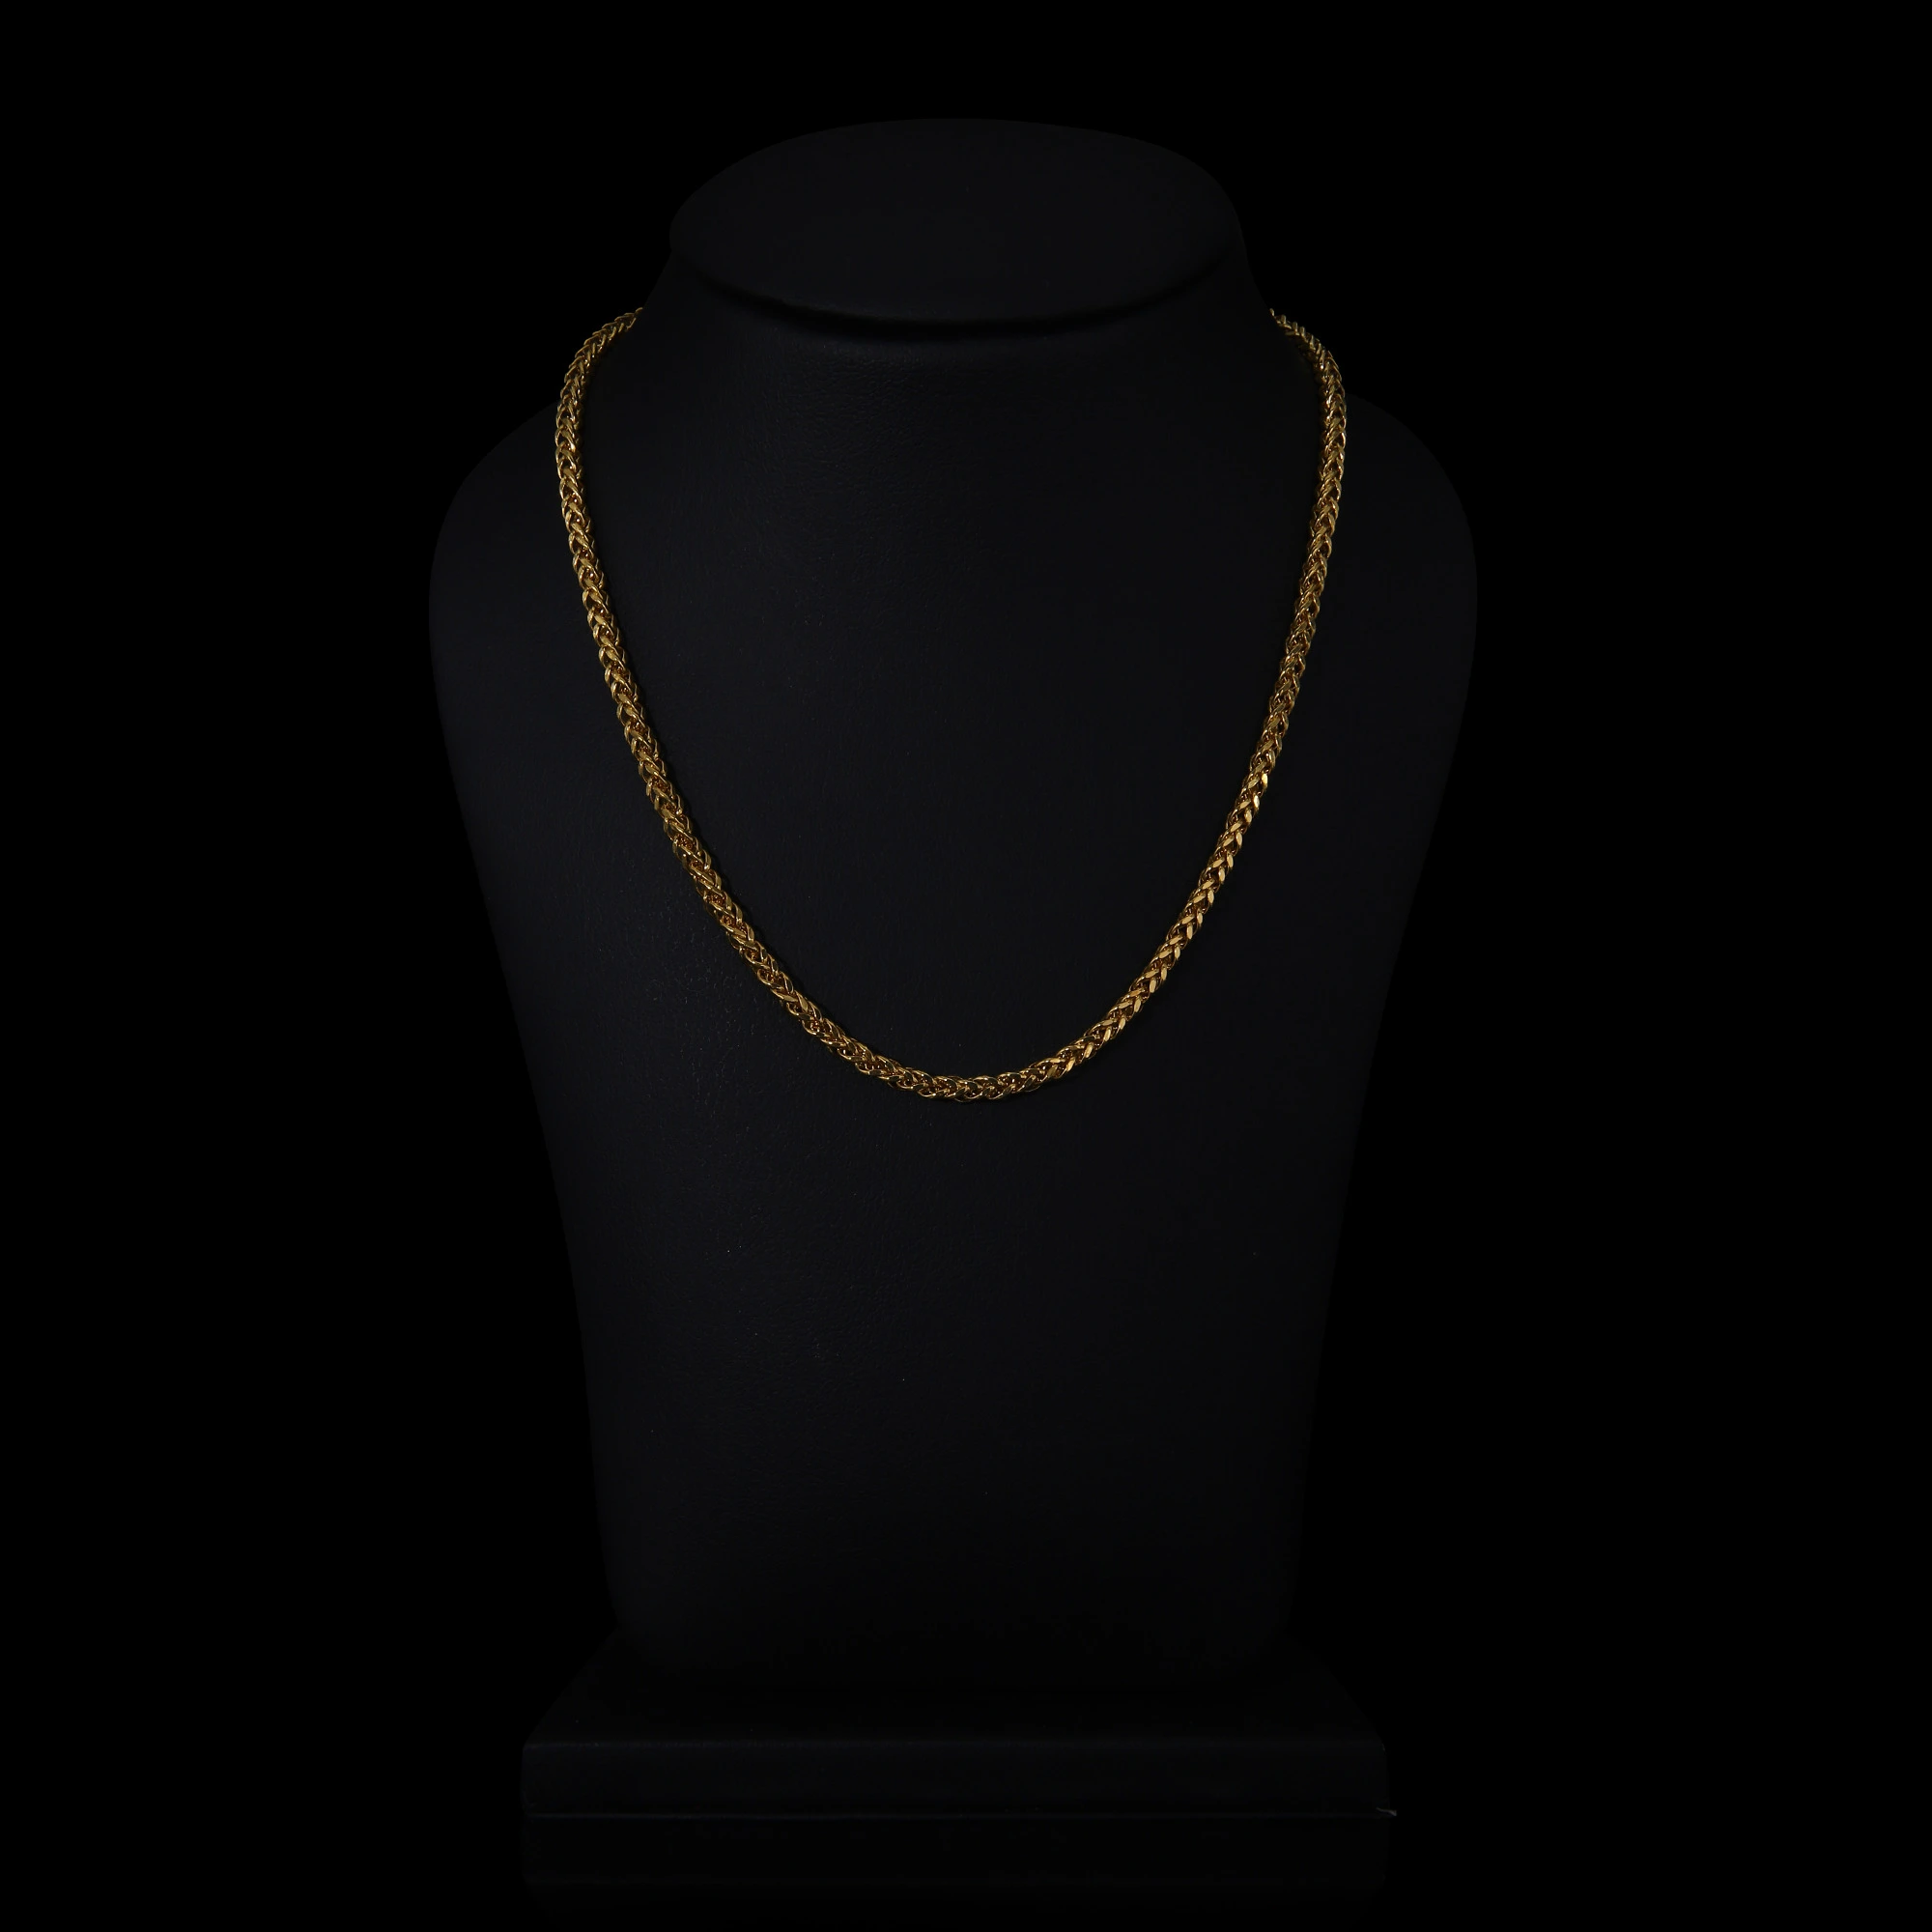 gold chain on black dummy with black background